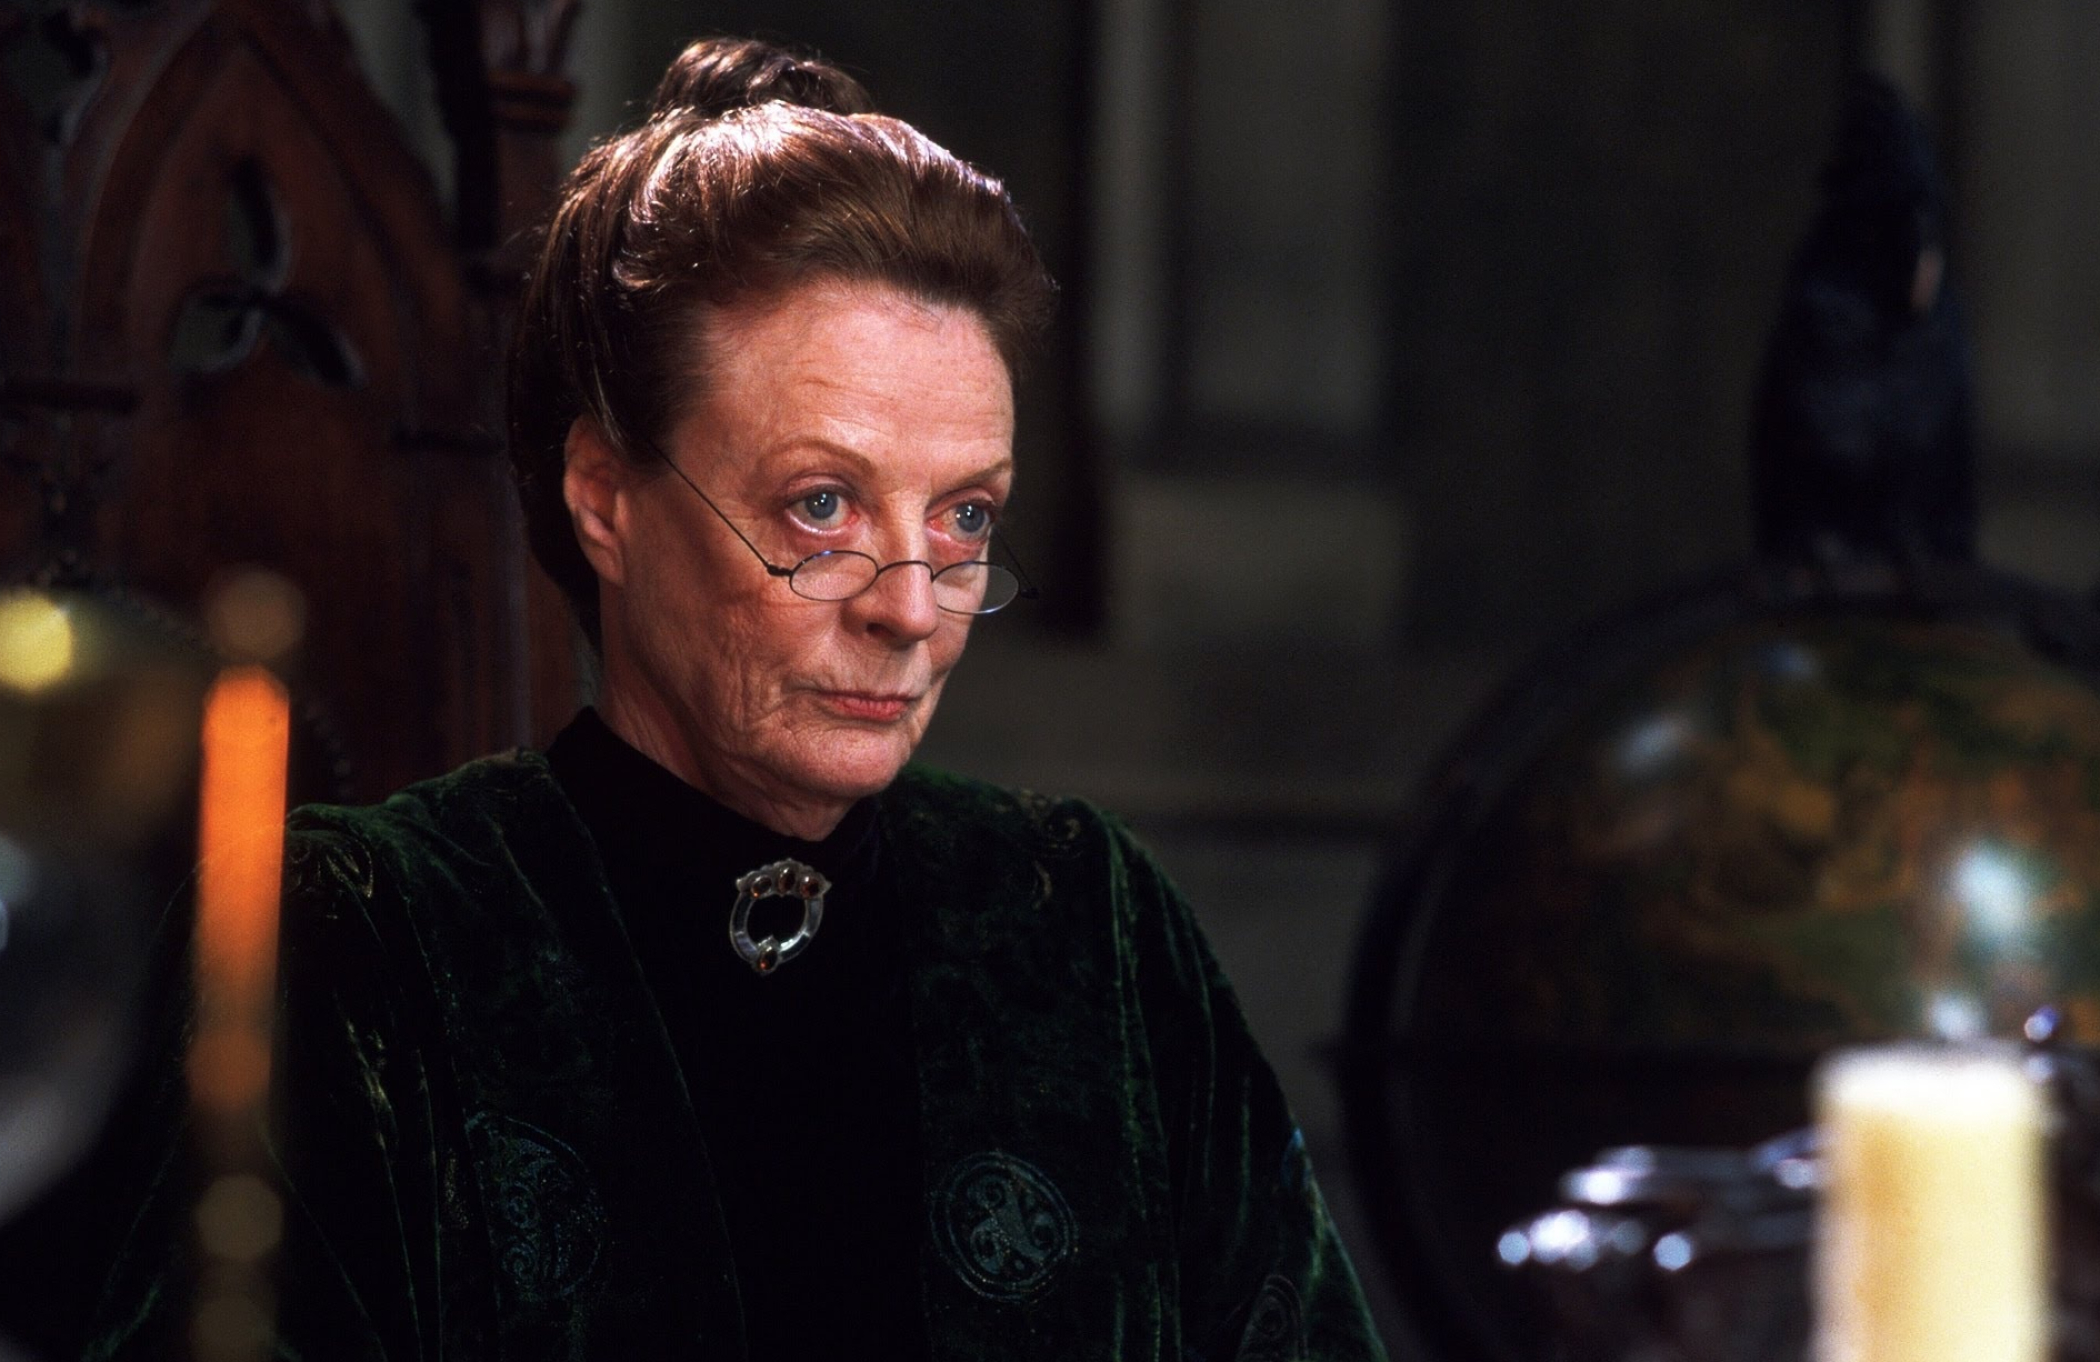 Professor McGonagall movie, High-resolution wallpapers, Picture compilation, Fan-made, 2100x1370 HD Desktop